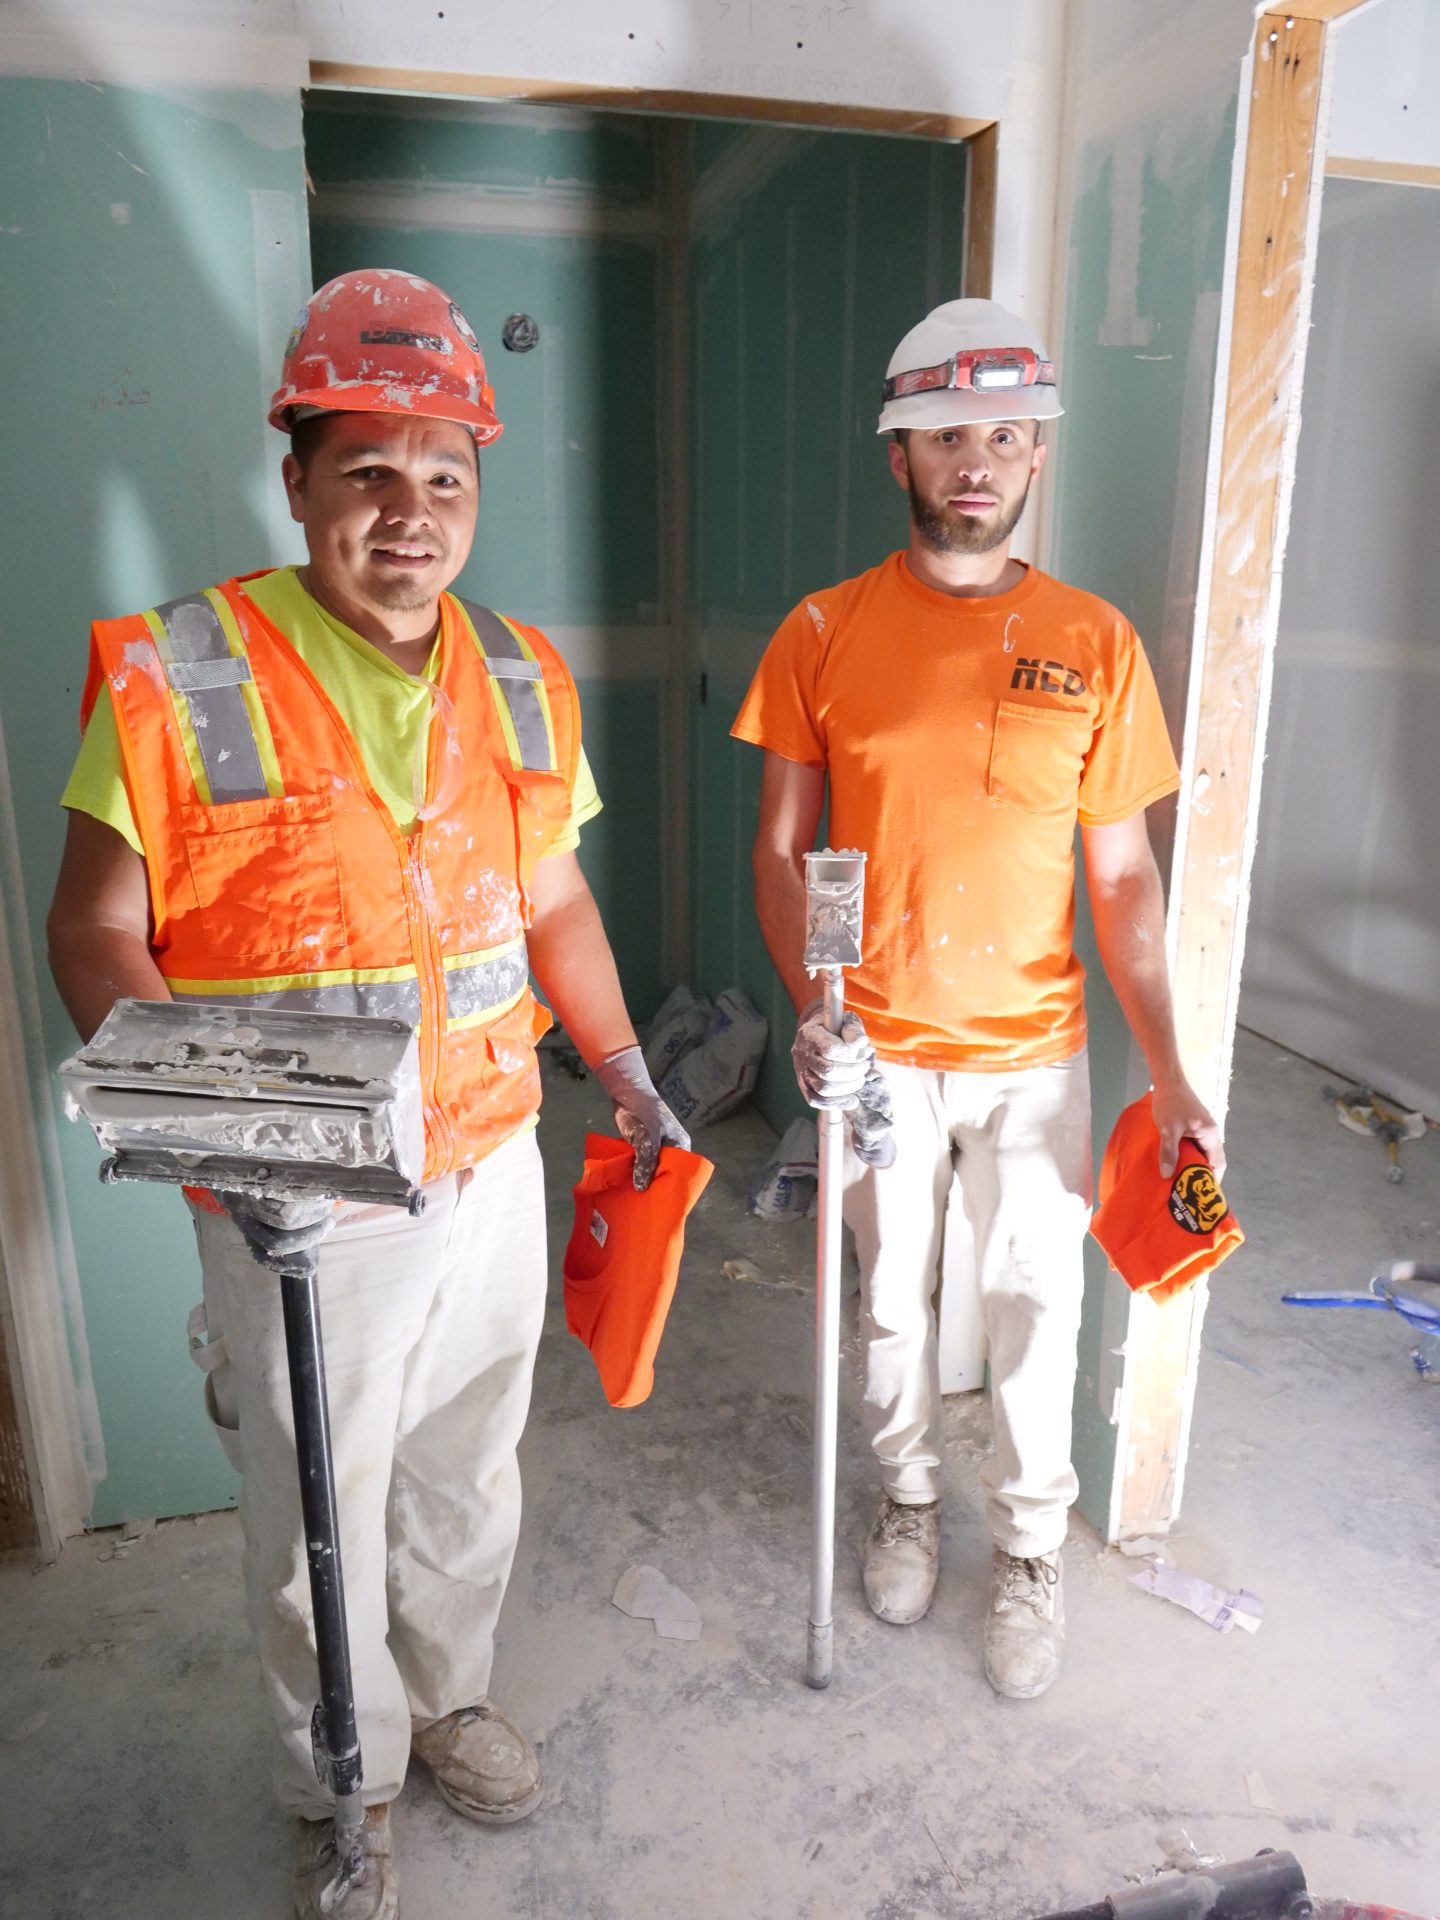 Image from the Gallery: Drywall Finishers 2023